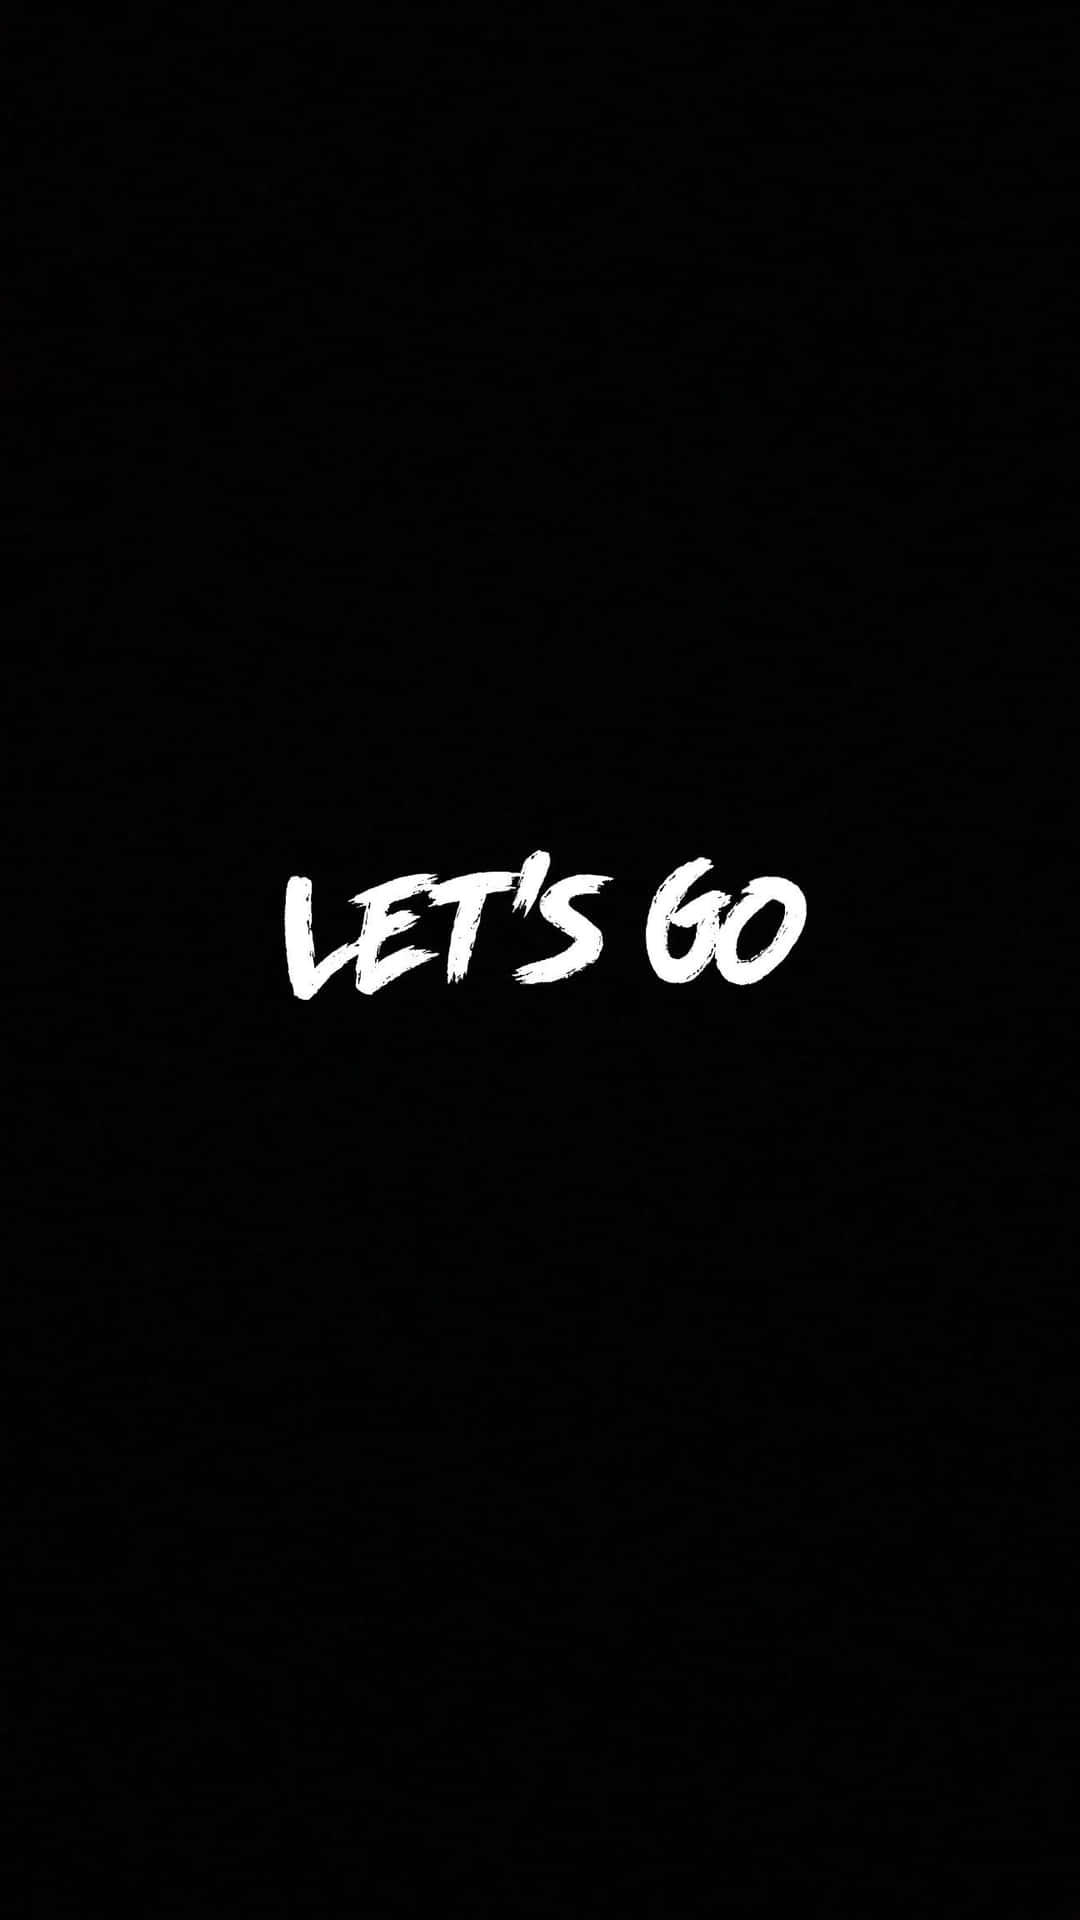 100+] Let Go Wallpapers | Wallpapers.com